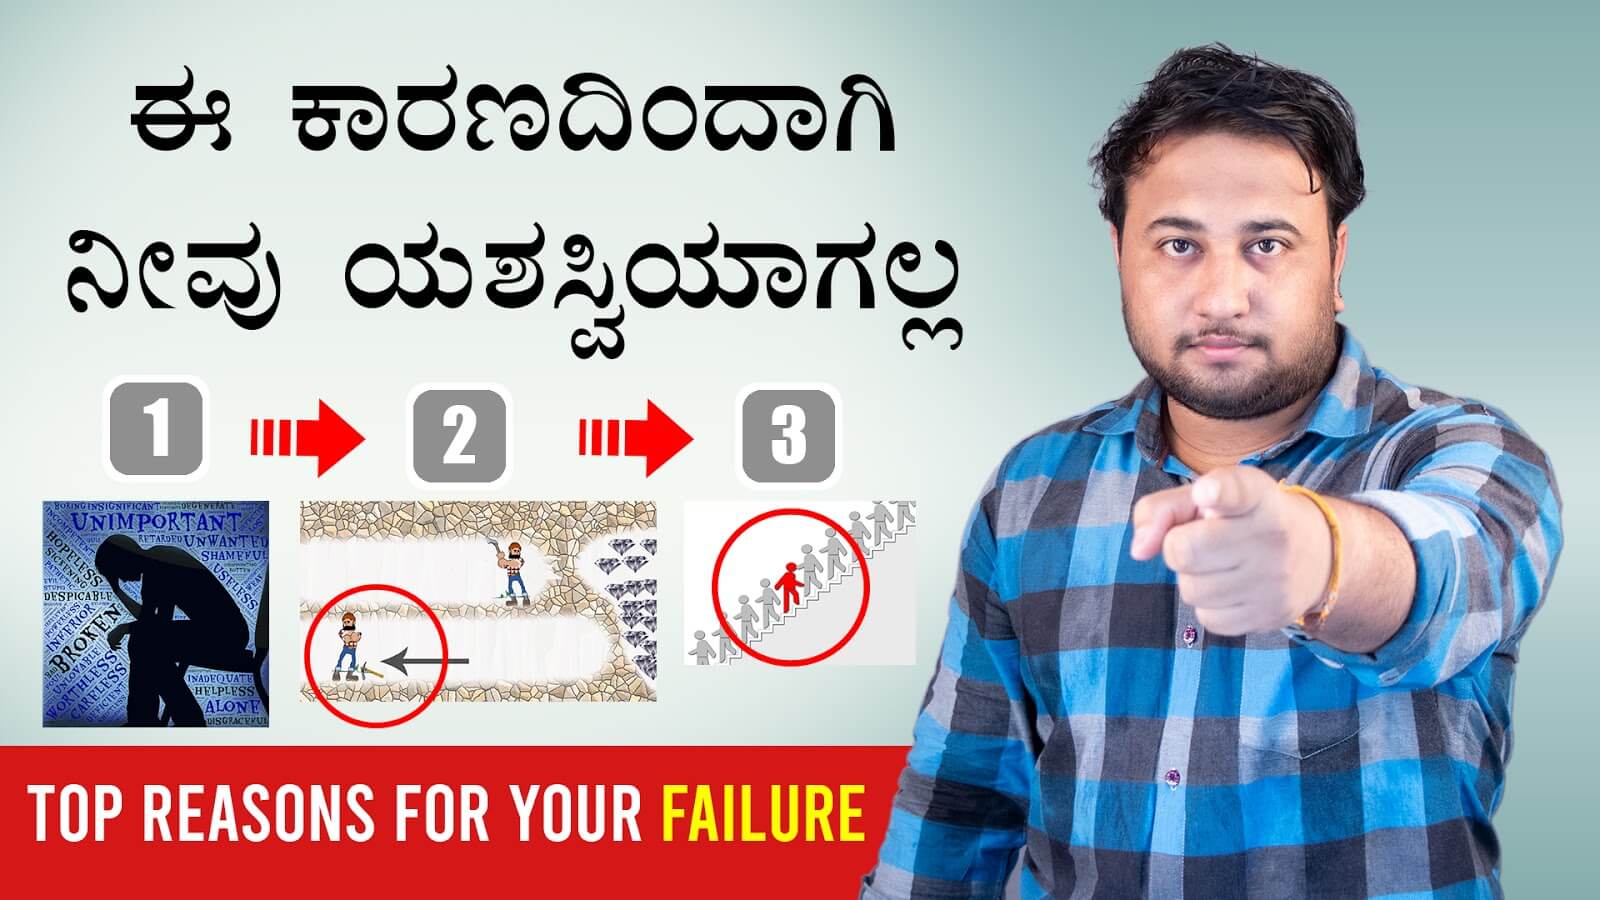 You are currently viewing ಈ ಕಾರಣದಿಂದಾಗಿ ನೀವು ಯಶಸ್ವಿಯಾಗಲ್ಲ – Top Reasons for your Failure in Kannada